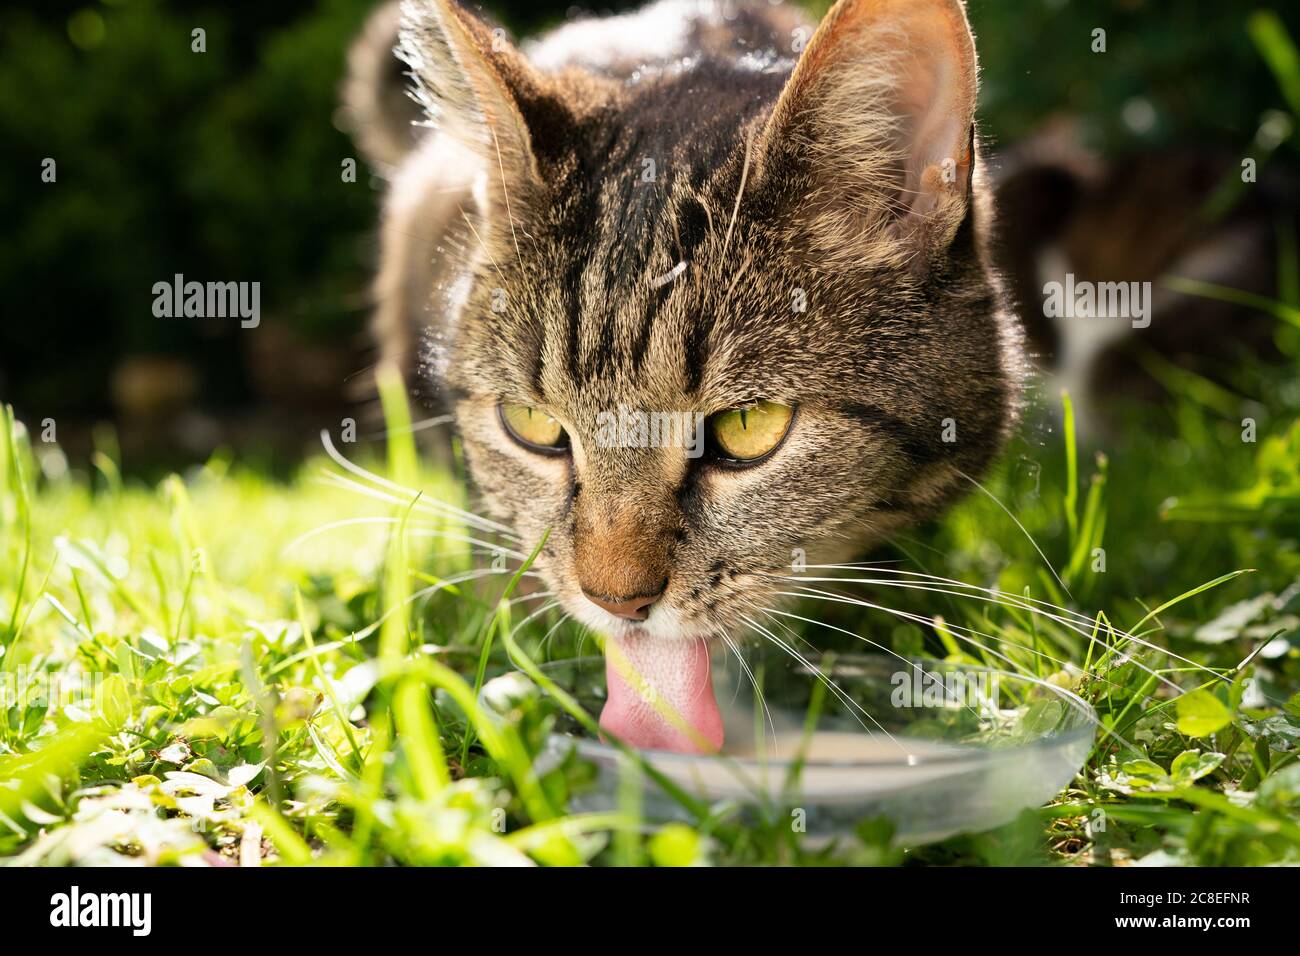 close up of a tabby cat drinking milk outdoors on grass Stock Photo